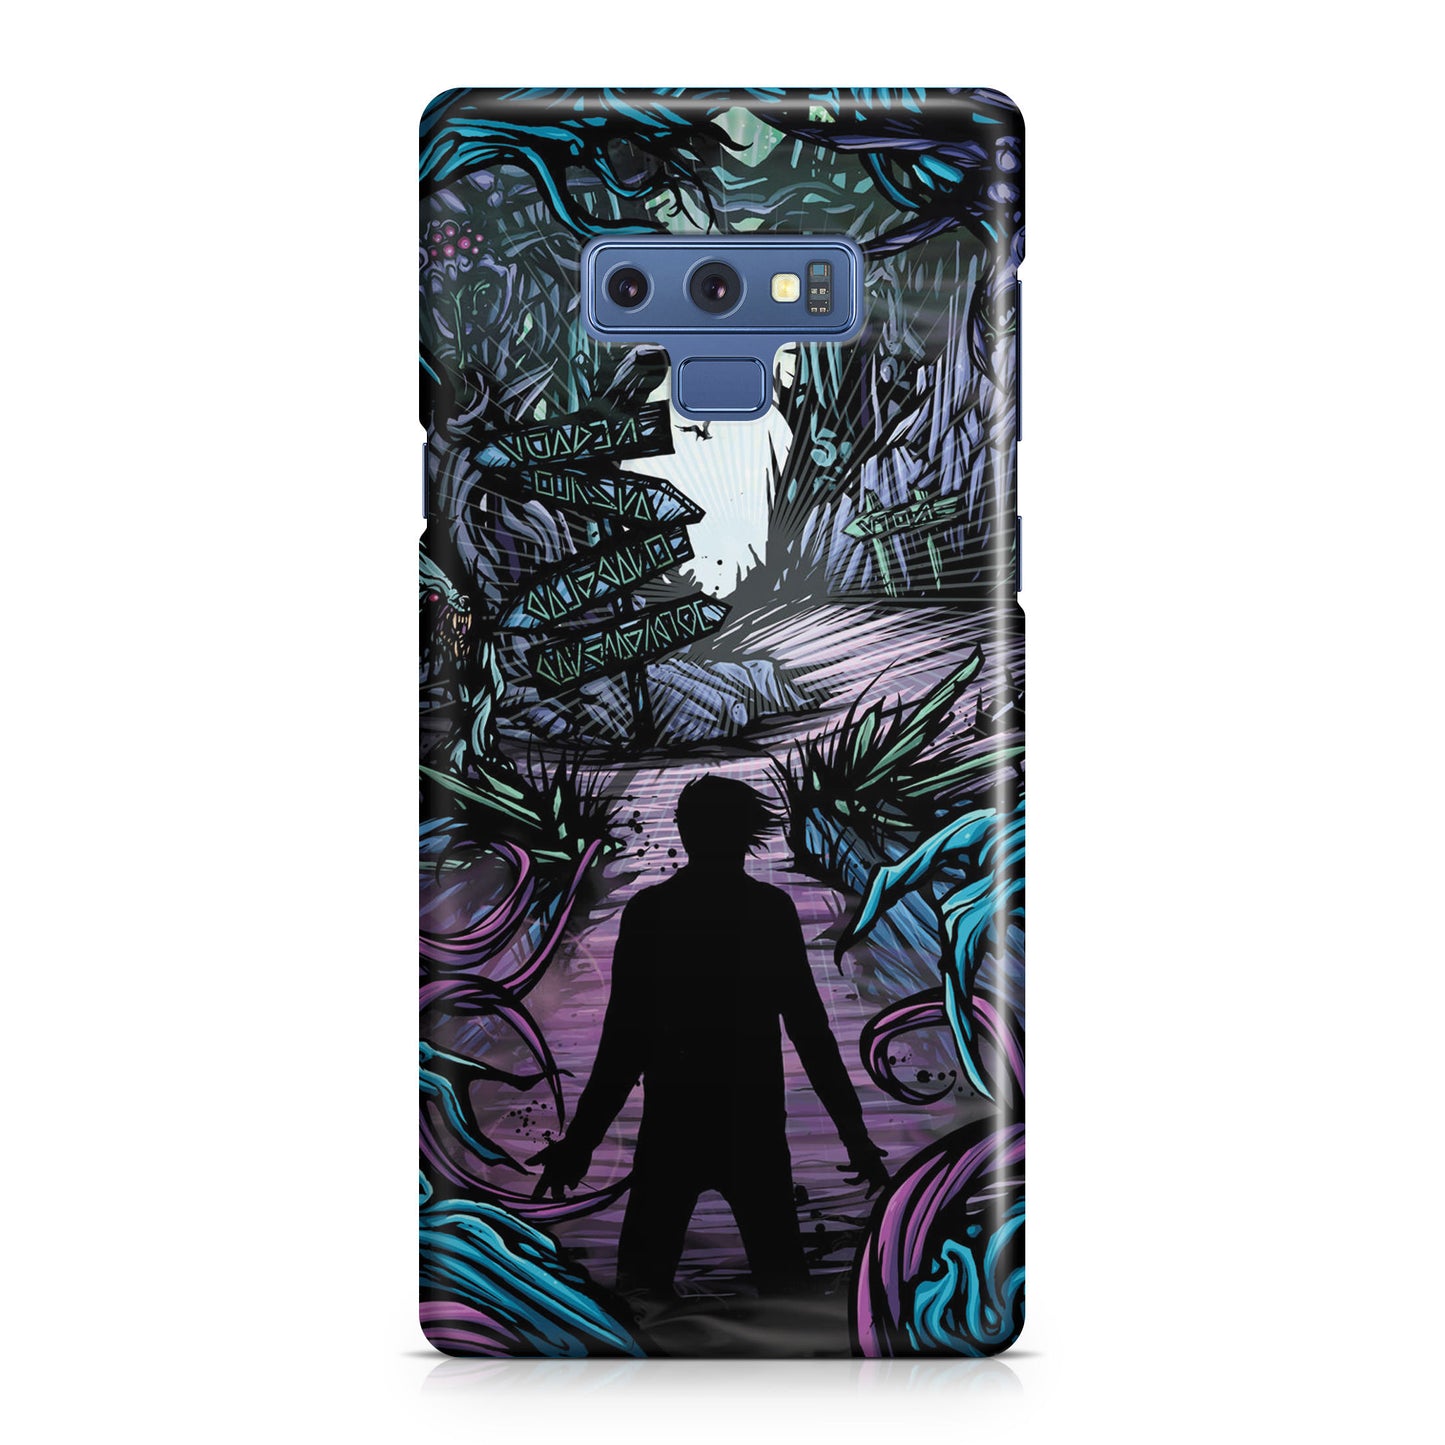 A Day To Remember Have Faith In Me Poster Galaxy Note 9 Case